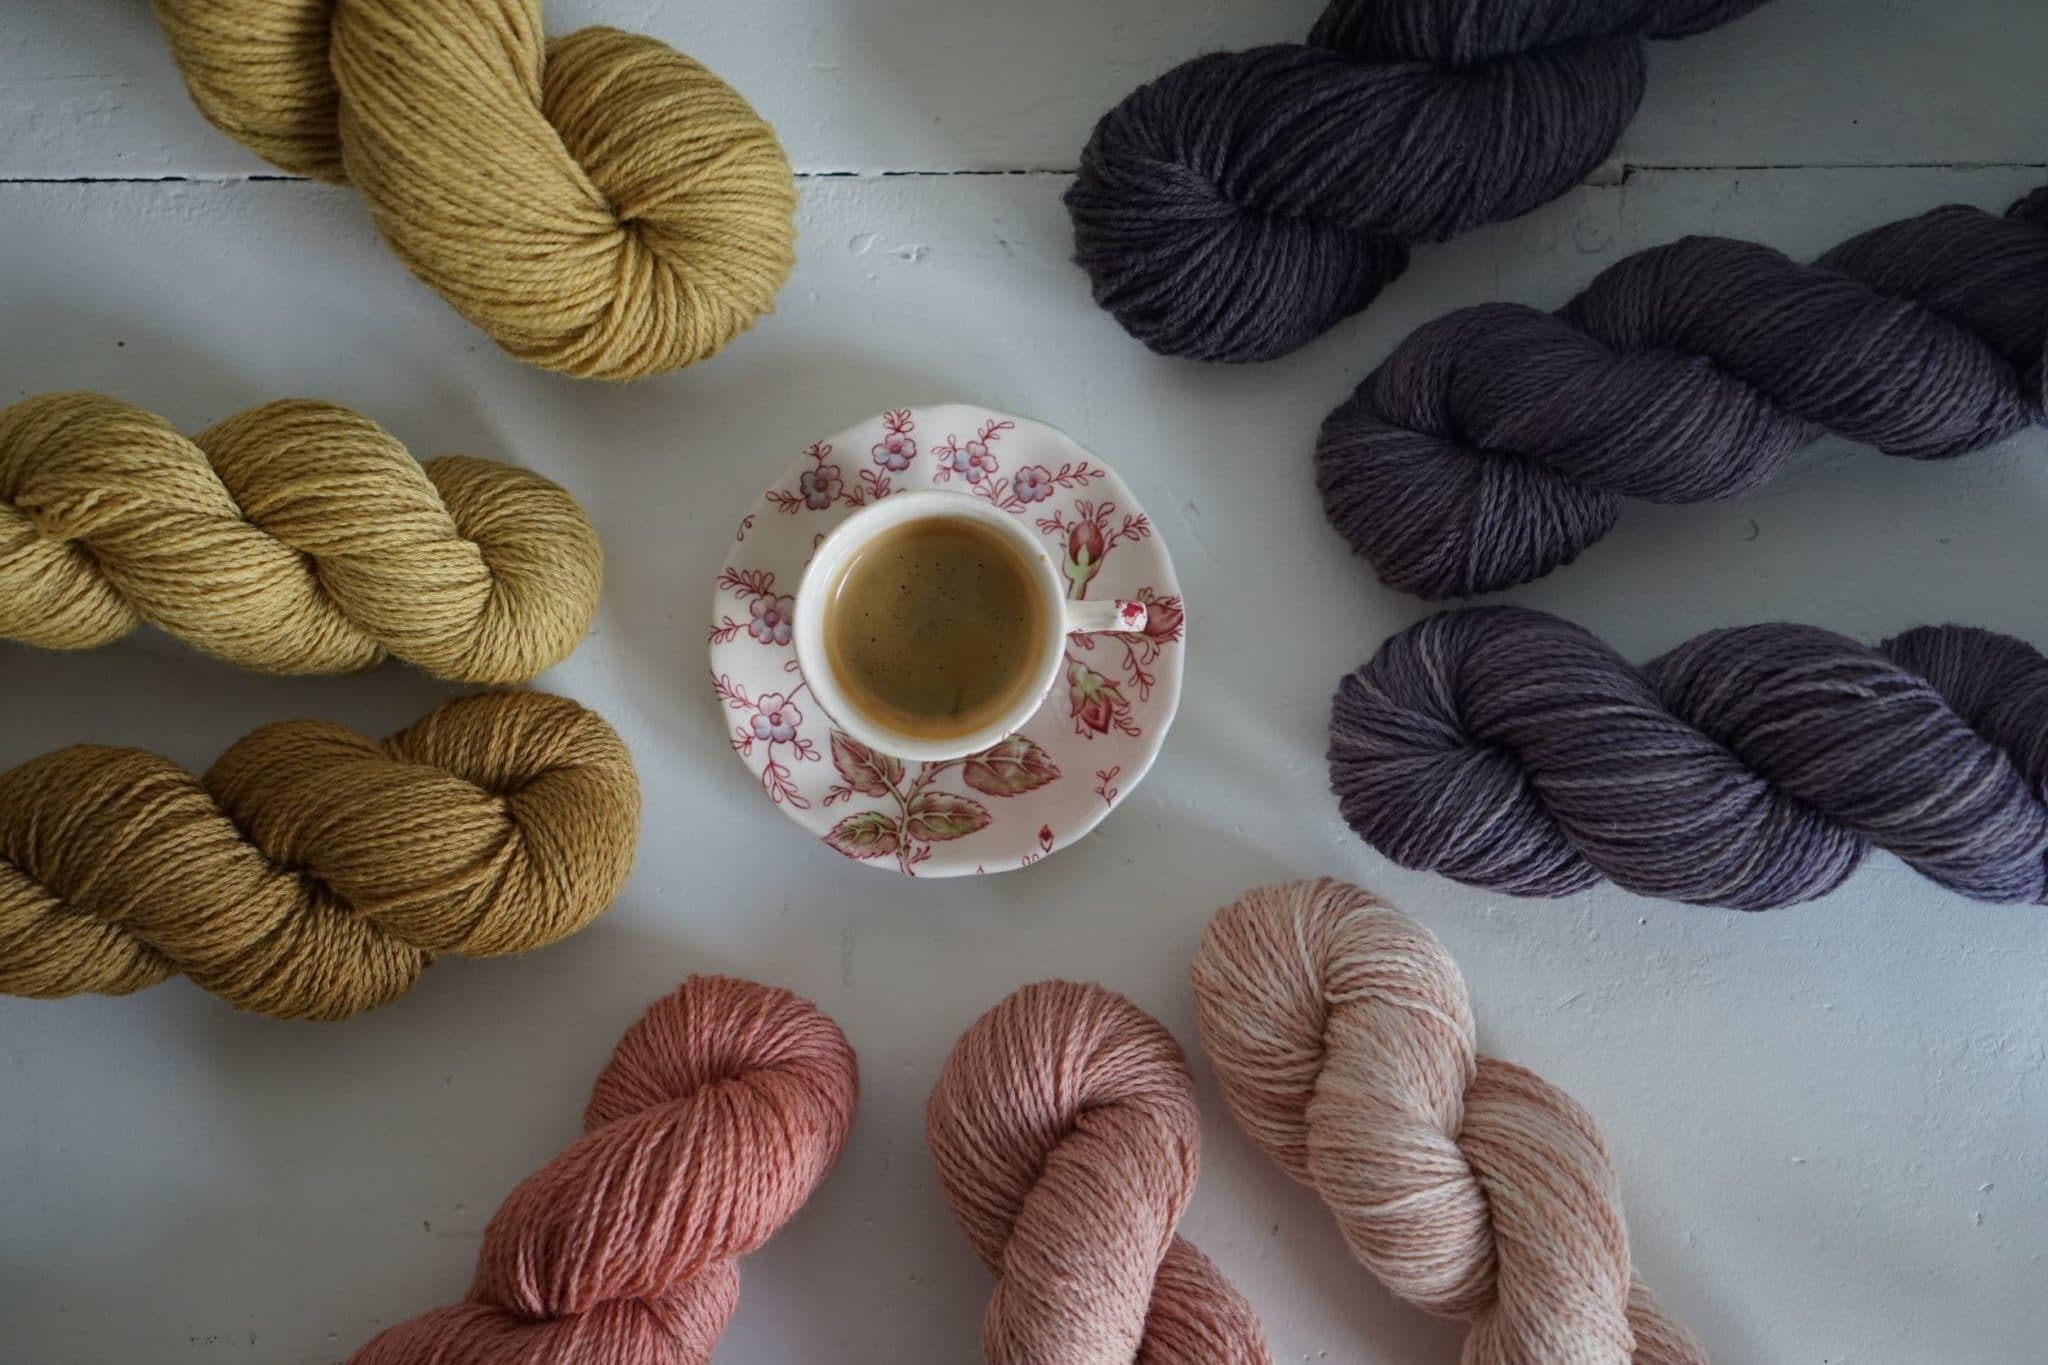 How To Dye Yarn With Coffee - Rosemary And Pines Fiber Arts